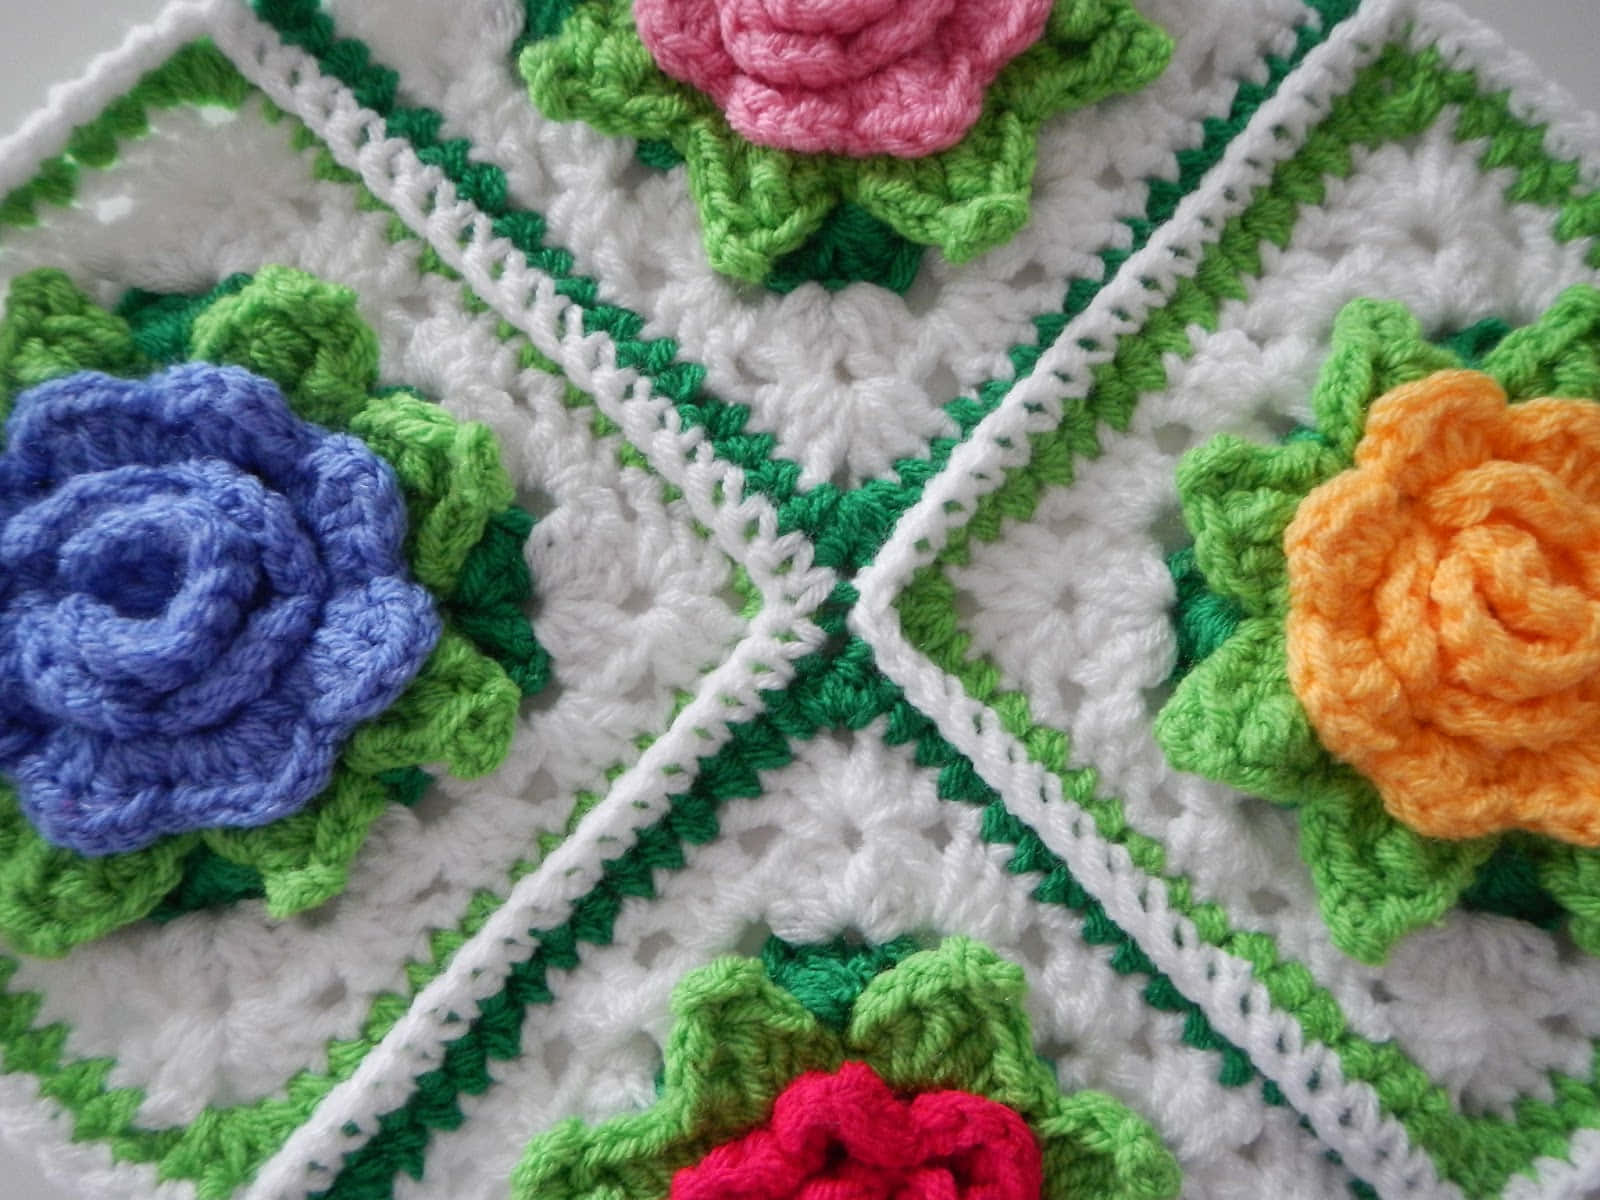 A meticulously crafted crochet blanket laid out on a vintage wooden table.